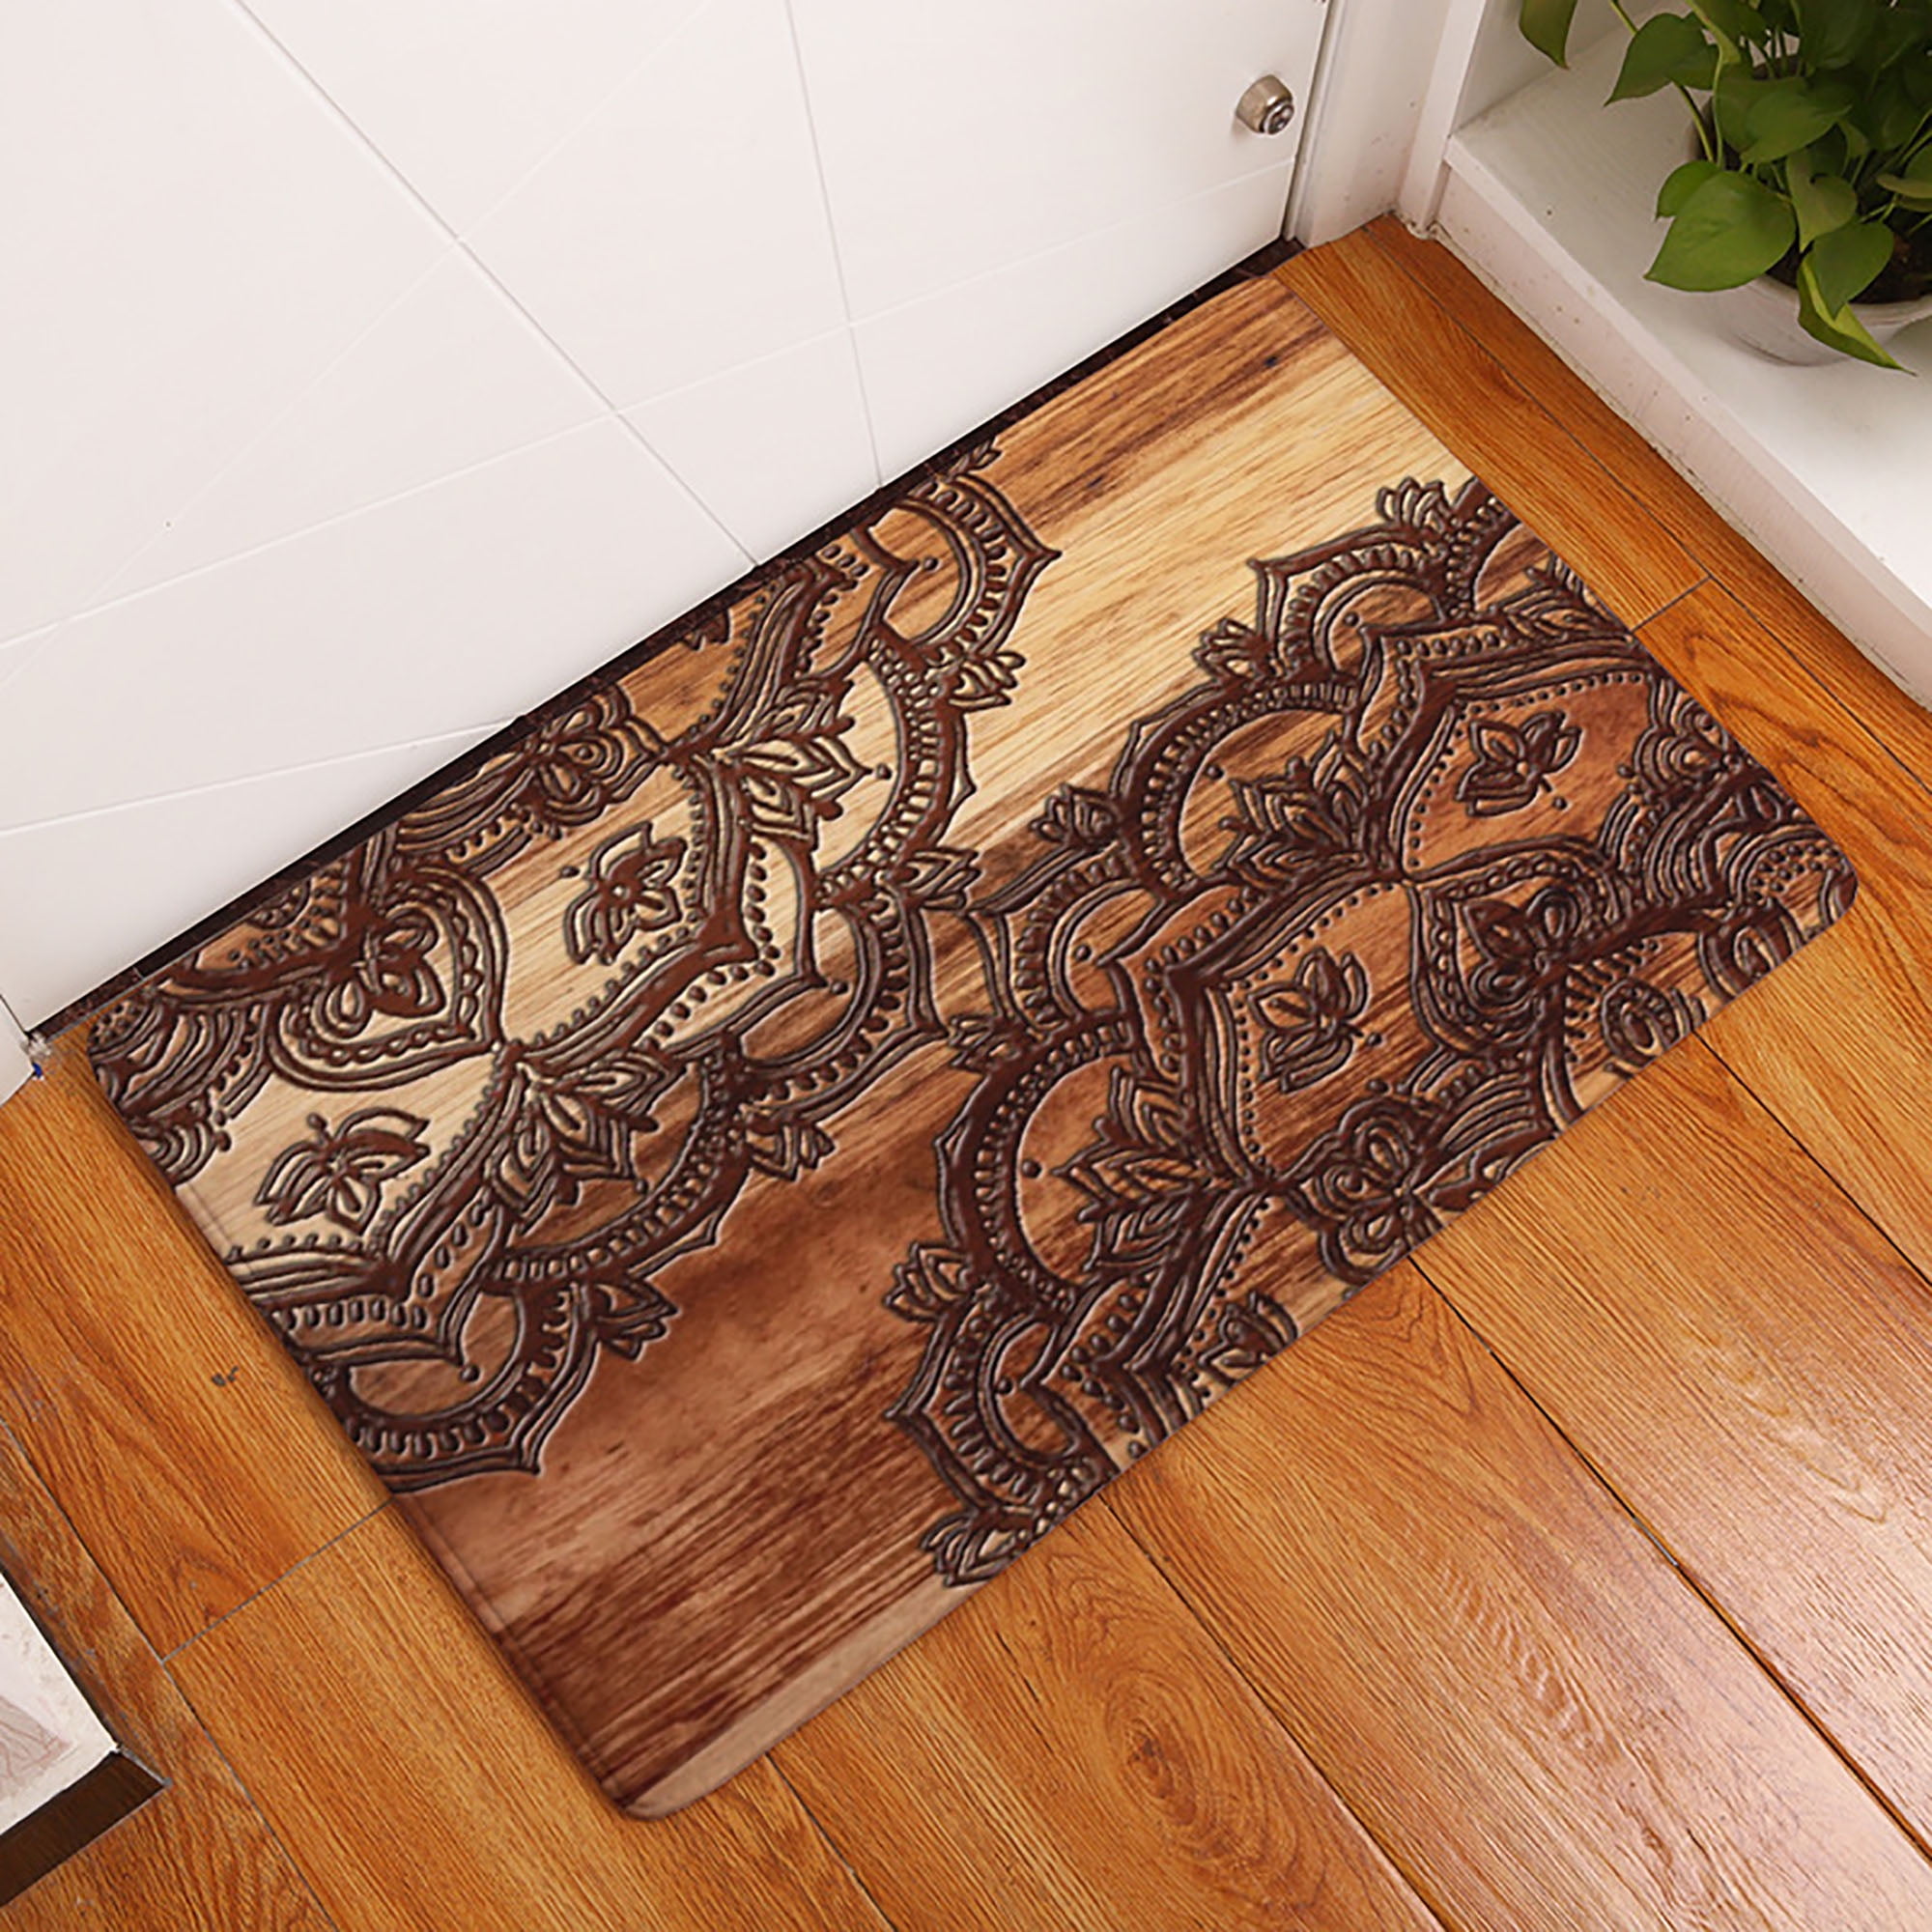 Details about   "Welcome" Classic Pineapple Coir Doormat 